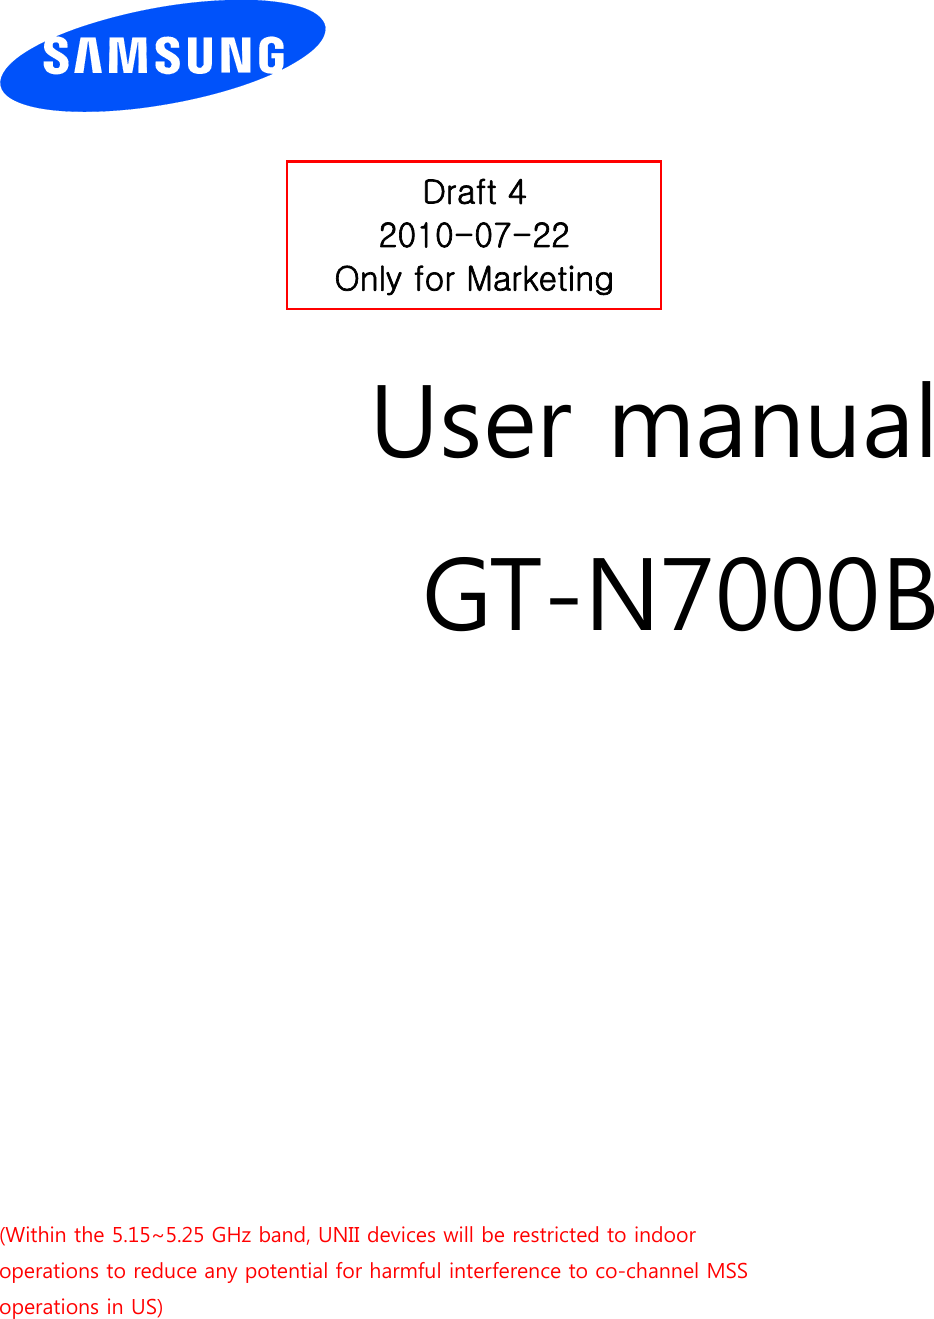          User manual GT-N7000B                (Within the 5.15~5.25 GHz band, UNII devices will be restricted to indoor operations to reduce any potential for harmful interference to co-channel MSS operations in US) Draft 4 2010-07-22 Only for Marketing 